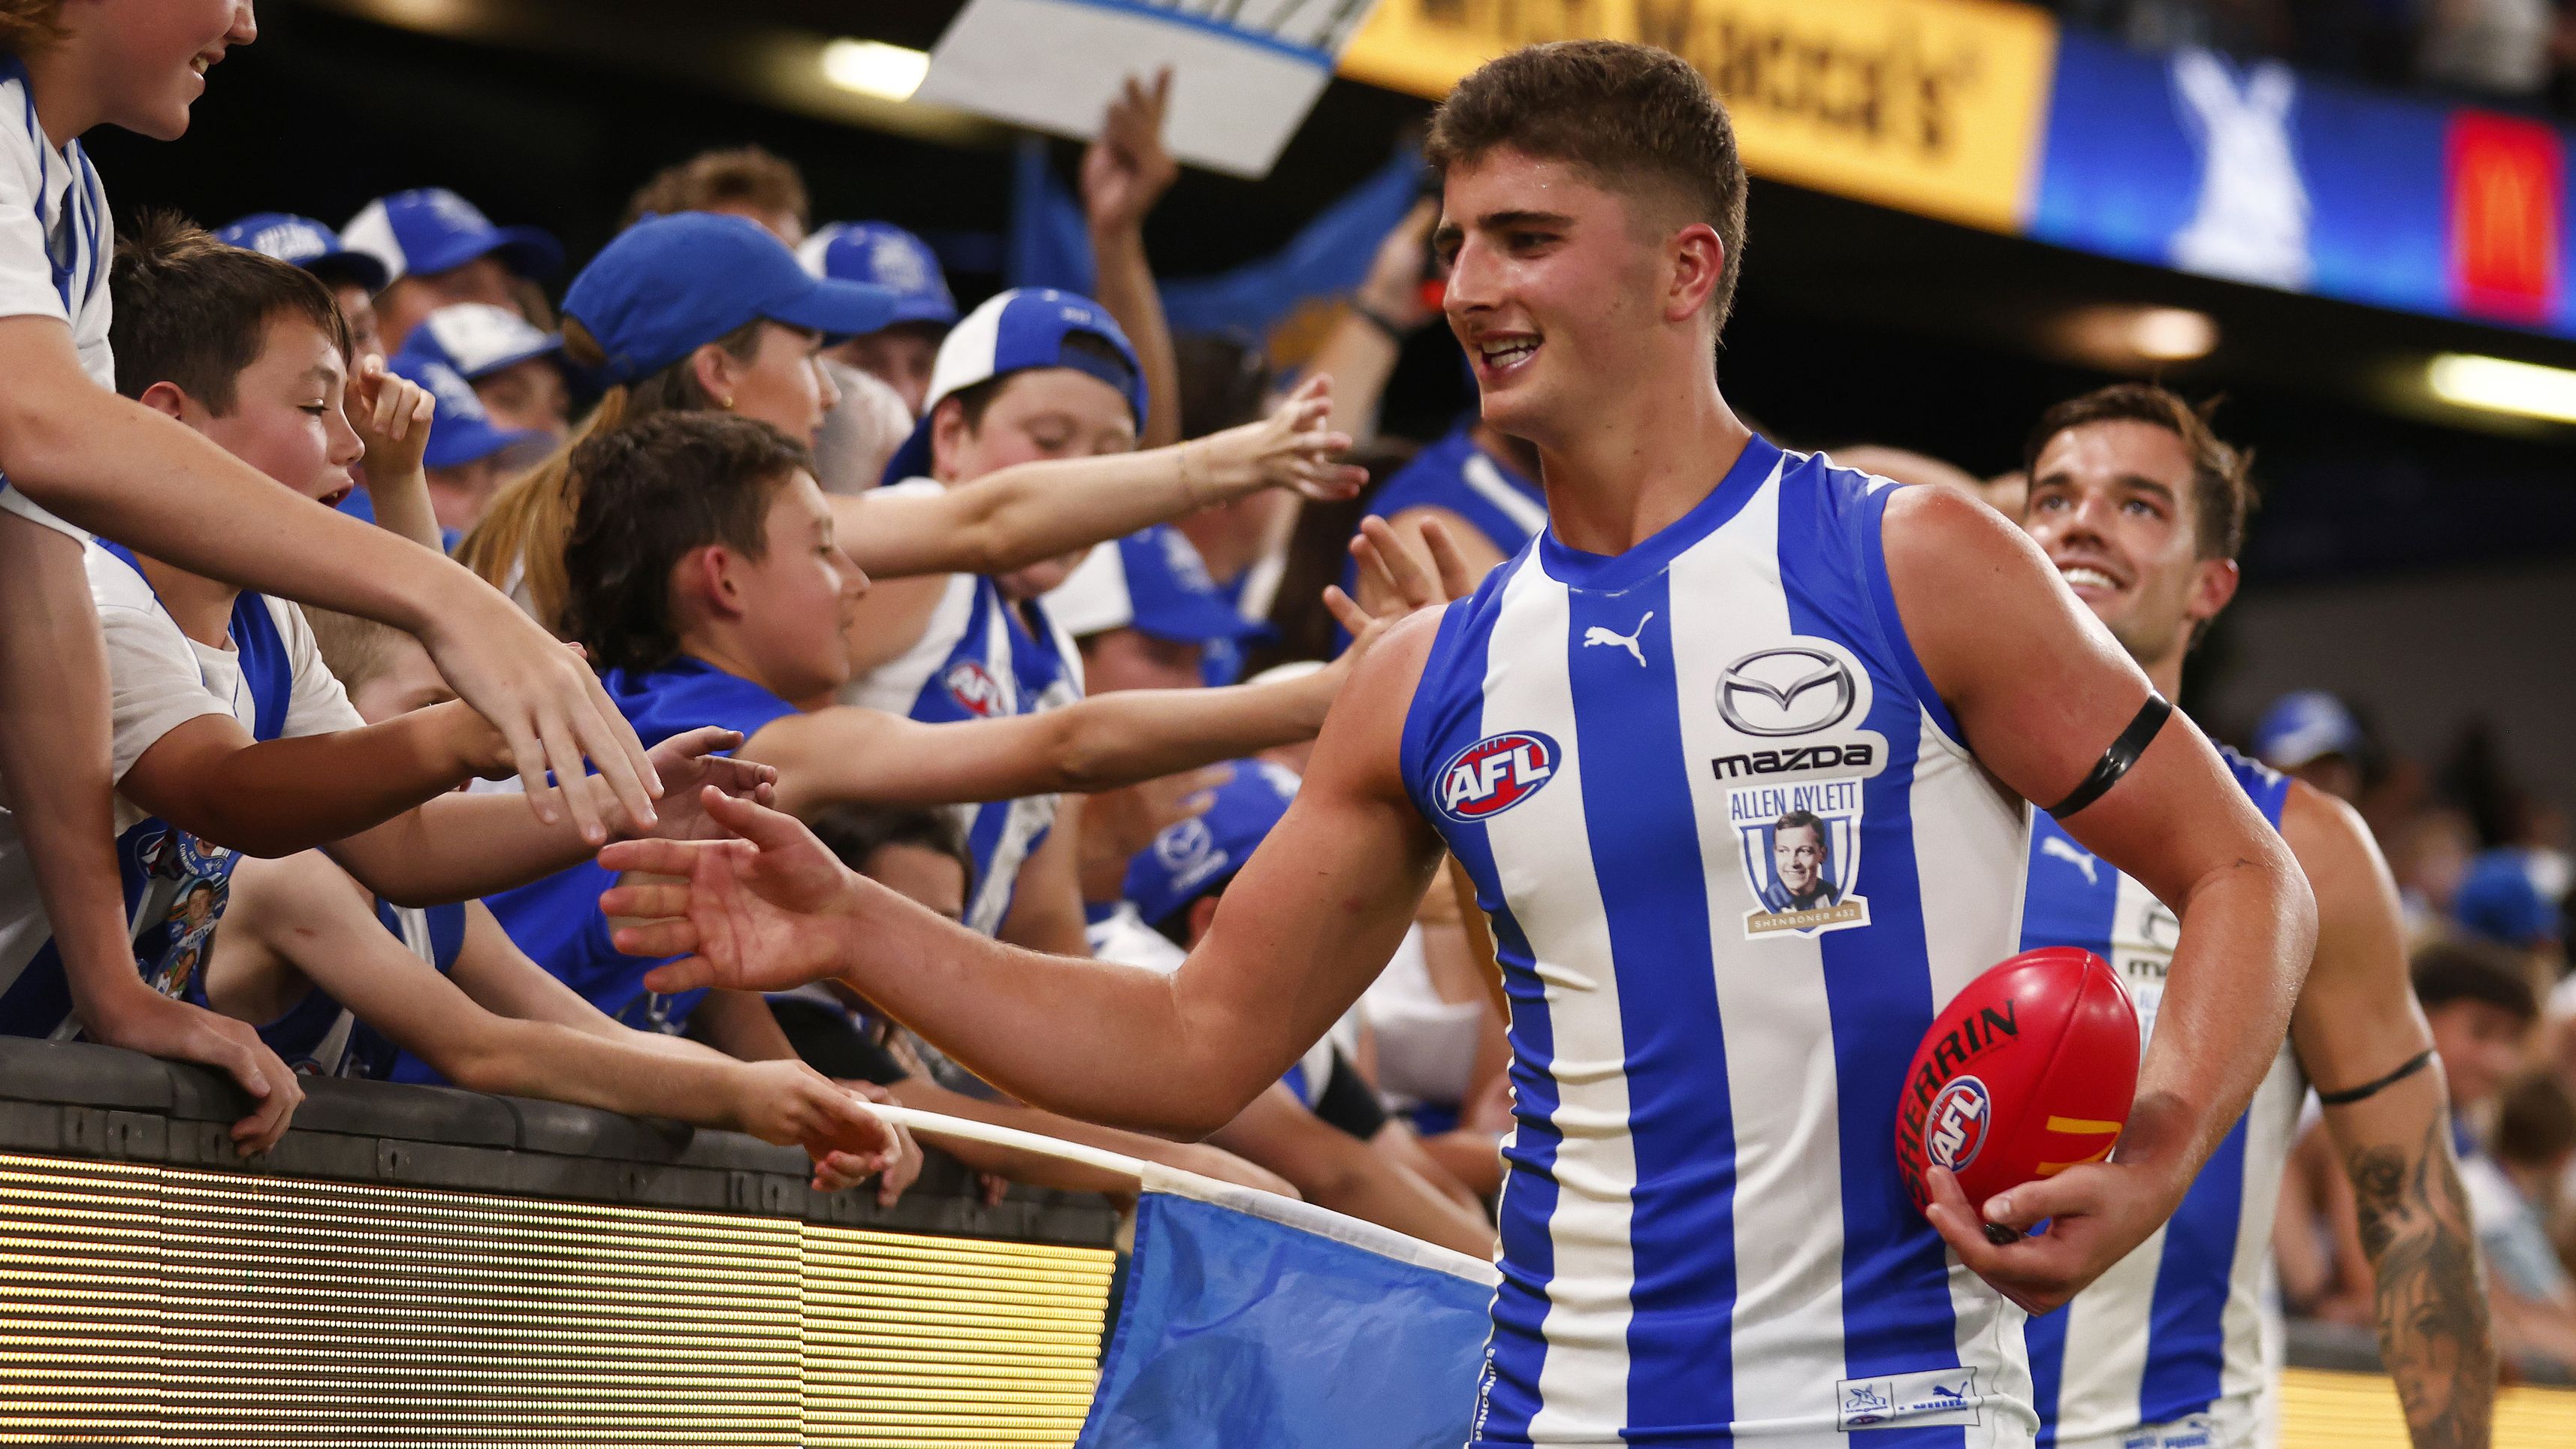 Harry Sheezel celebrates with fans after North Melbourne defeated the West Coast Eagles.